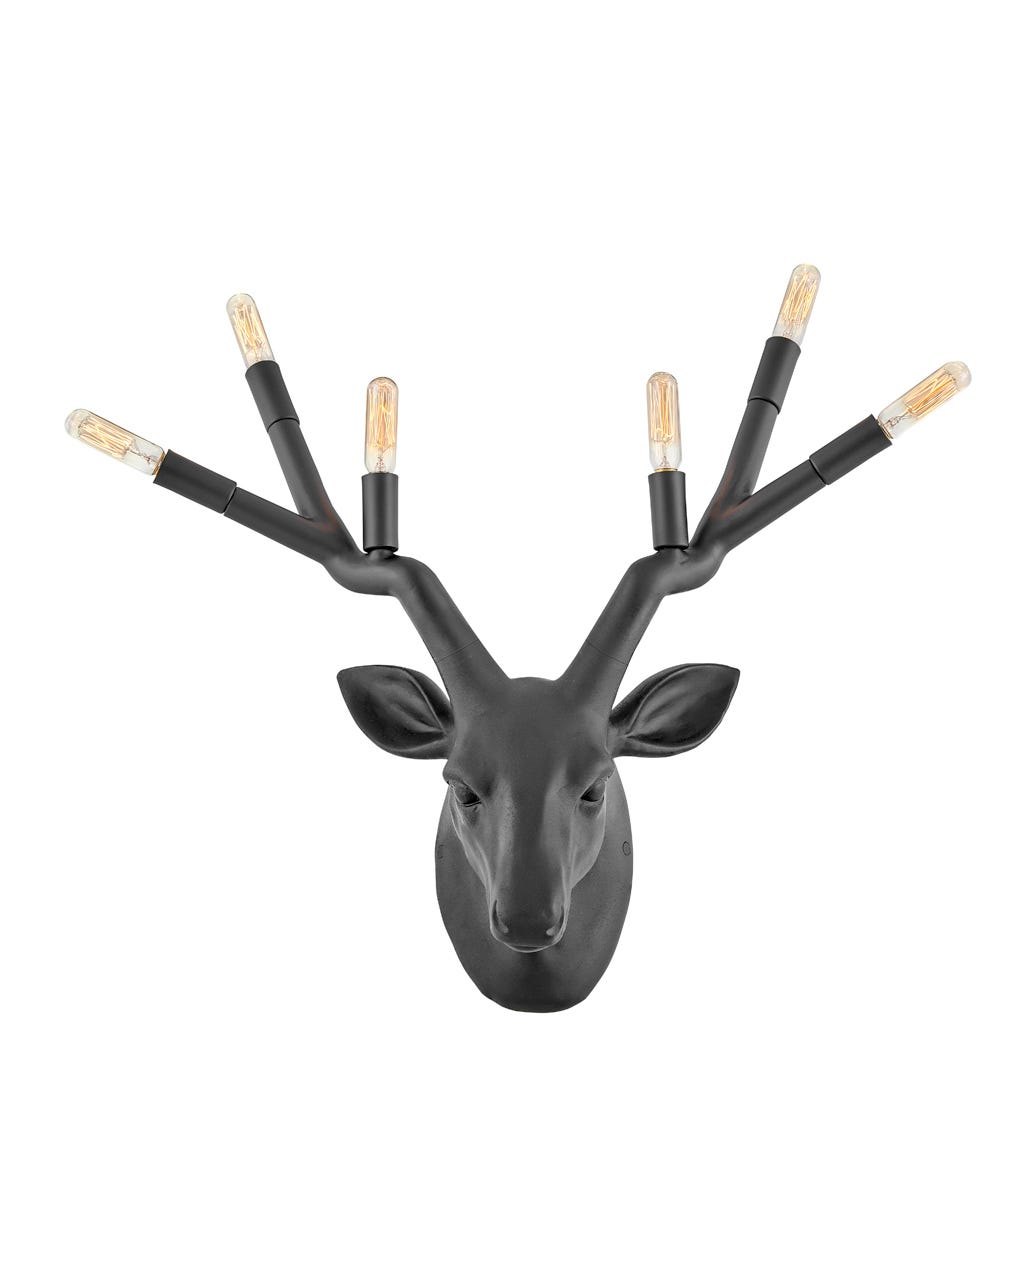 Hinkley Stag Sconce